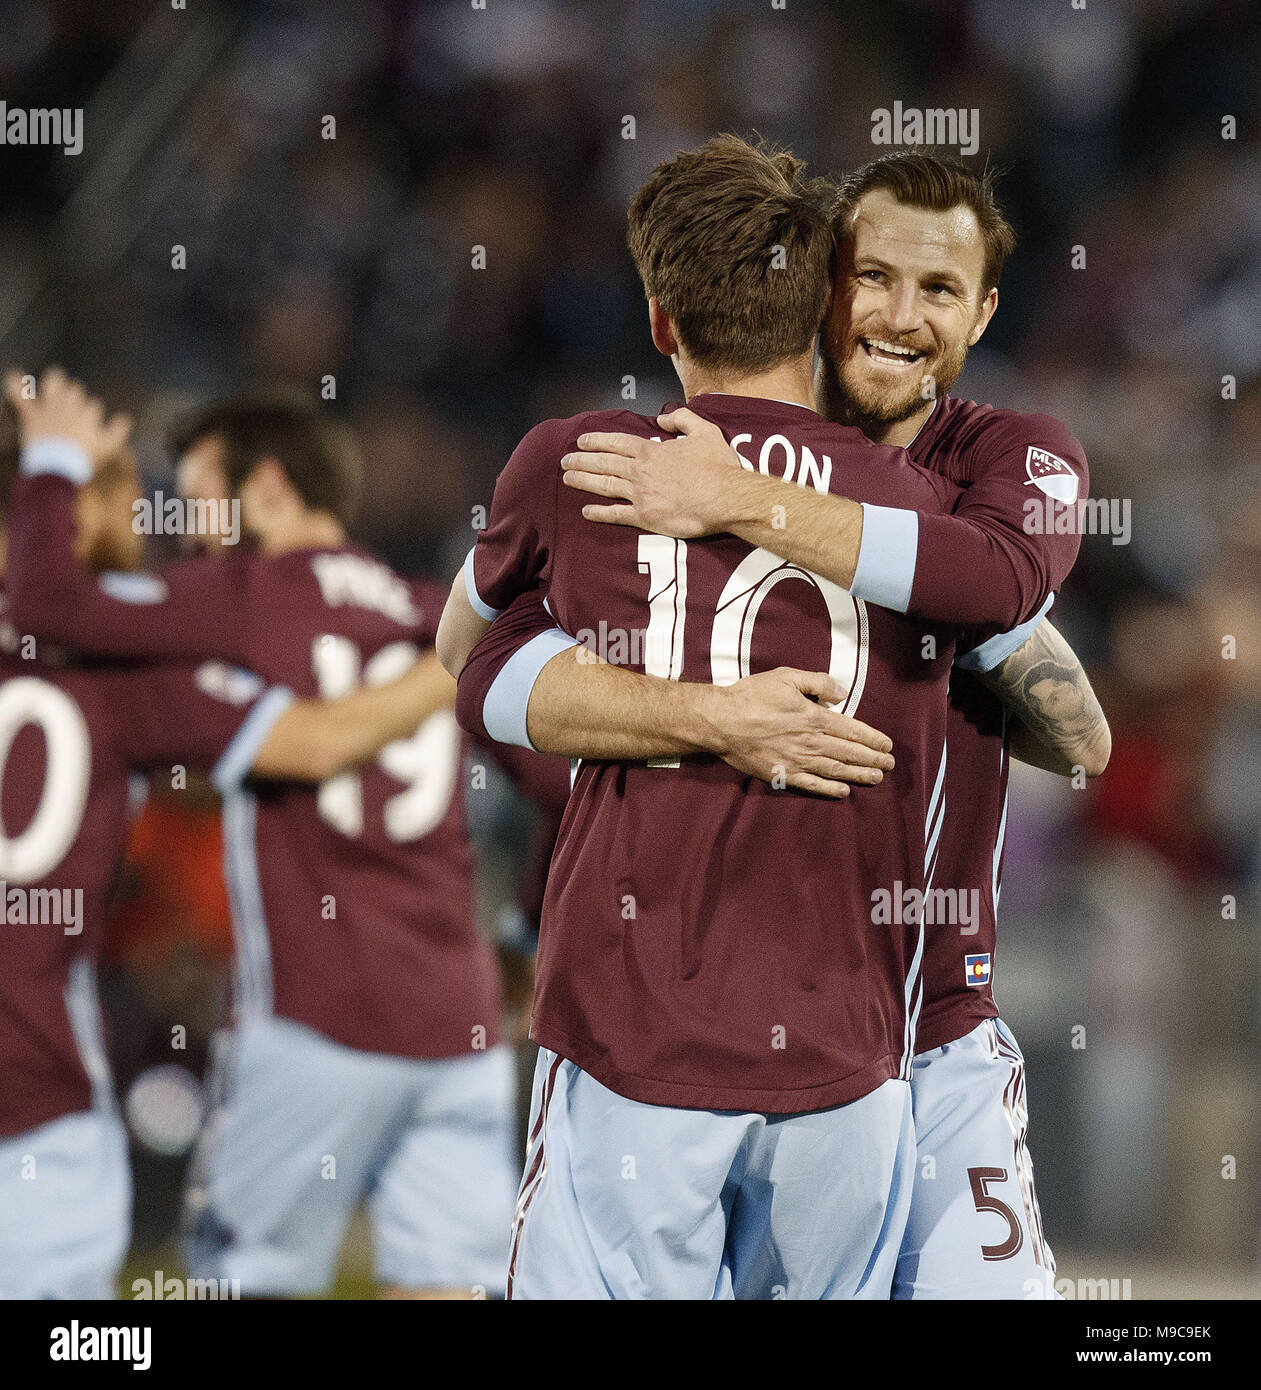 Commerce City, Colorado, USA. 24th Mar, 2018. Rapids MF JOE MASON, center, gets a congrat from team mate D TOMMY SMITH, right, after scoring his teams 2nd. goal of the night during the 1st. Half at Dick's Sporting Goods Park Saturday Night. The Rapids tie Sporting KC 2-1. Credit: Hector Acevedo/ZUMA Wire/Alamy Live News Stock Photo